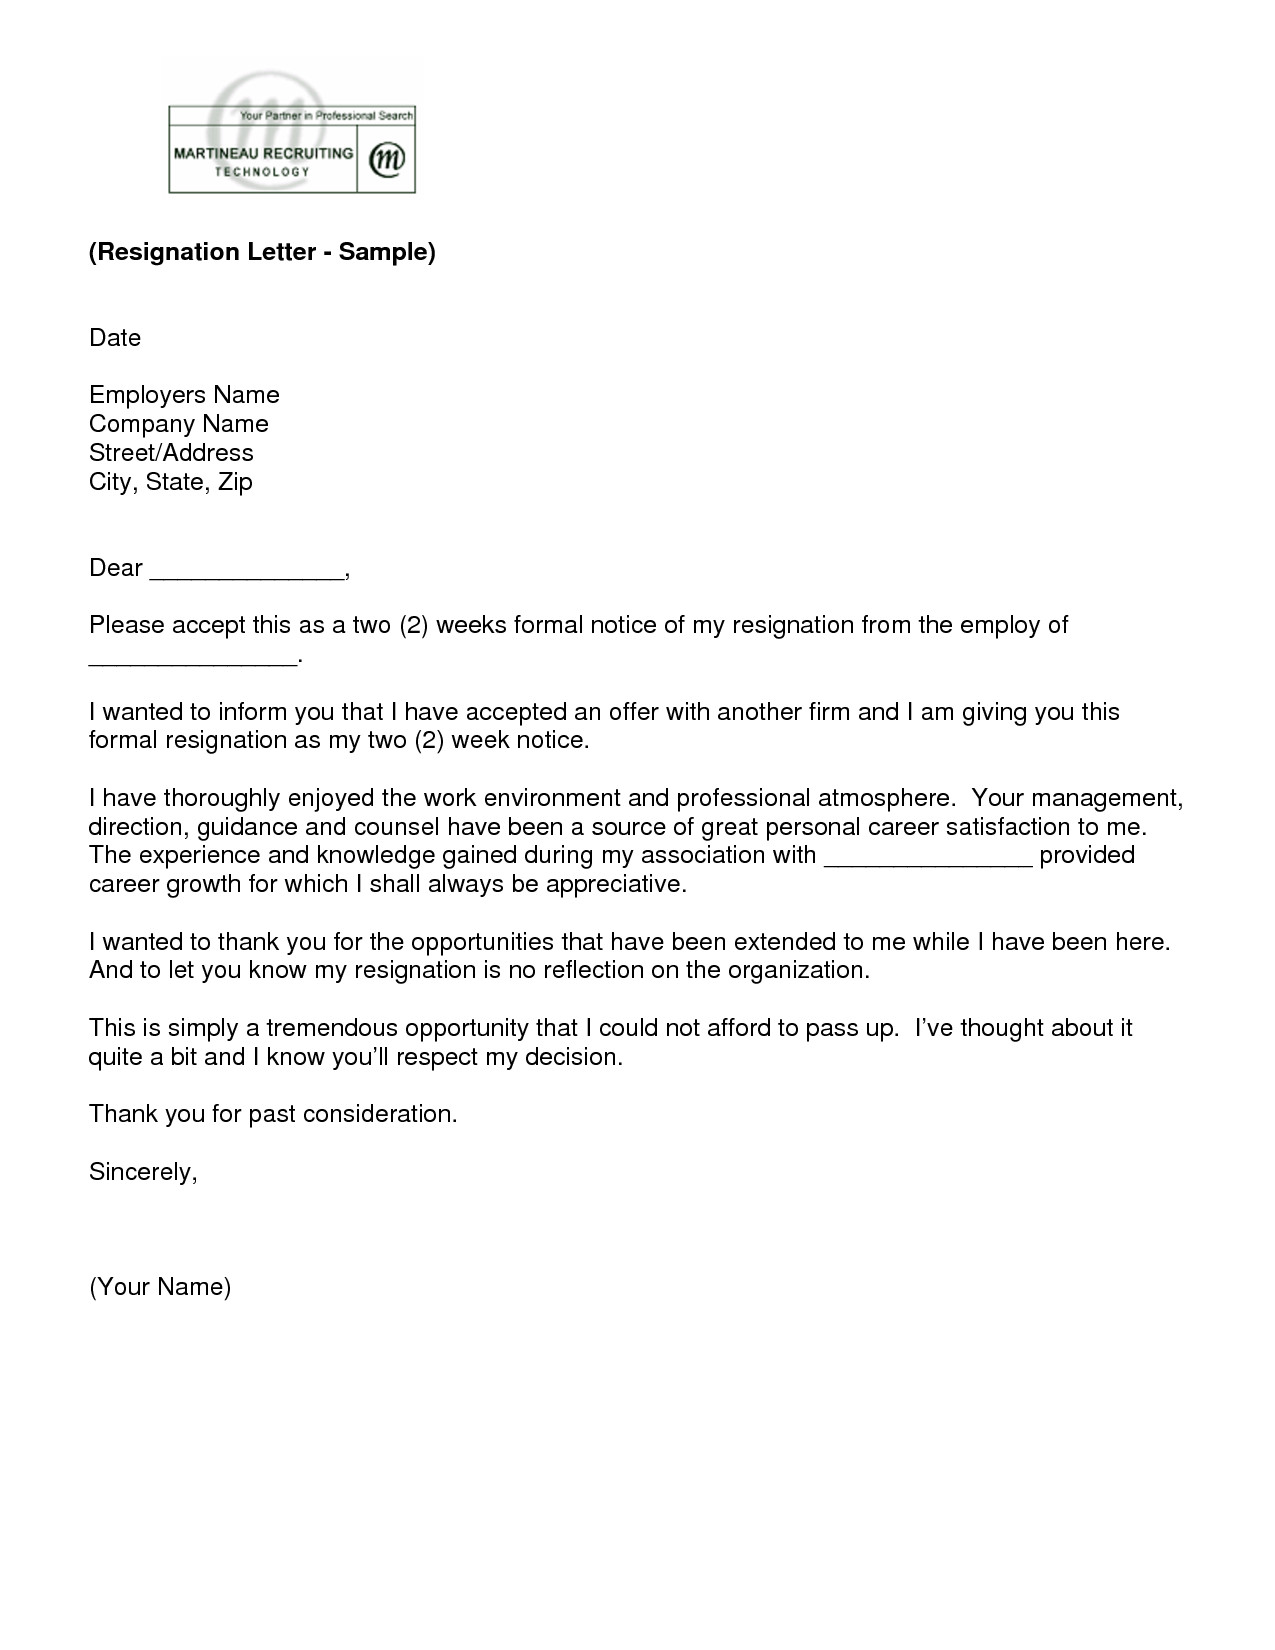 letter of resignation 2 weeks notice template